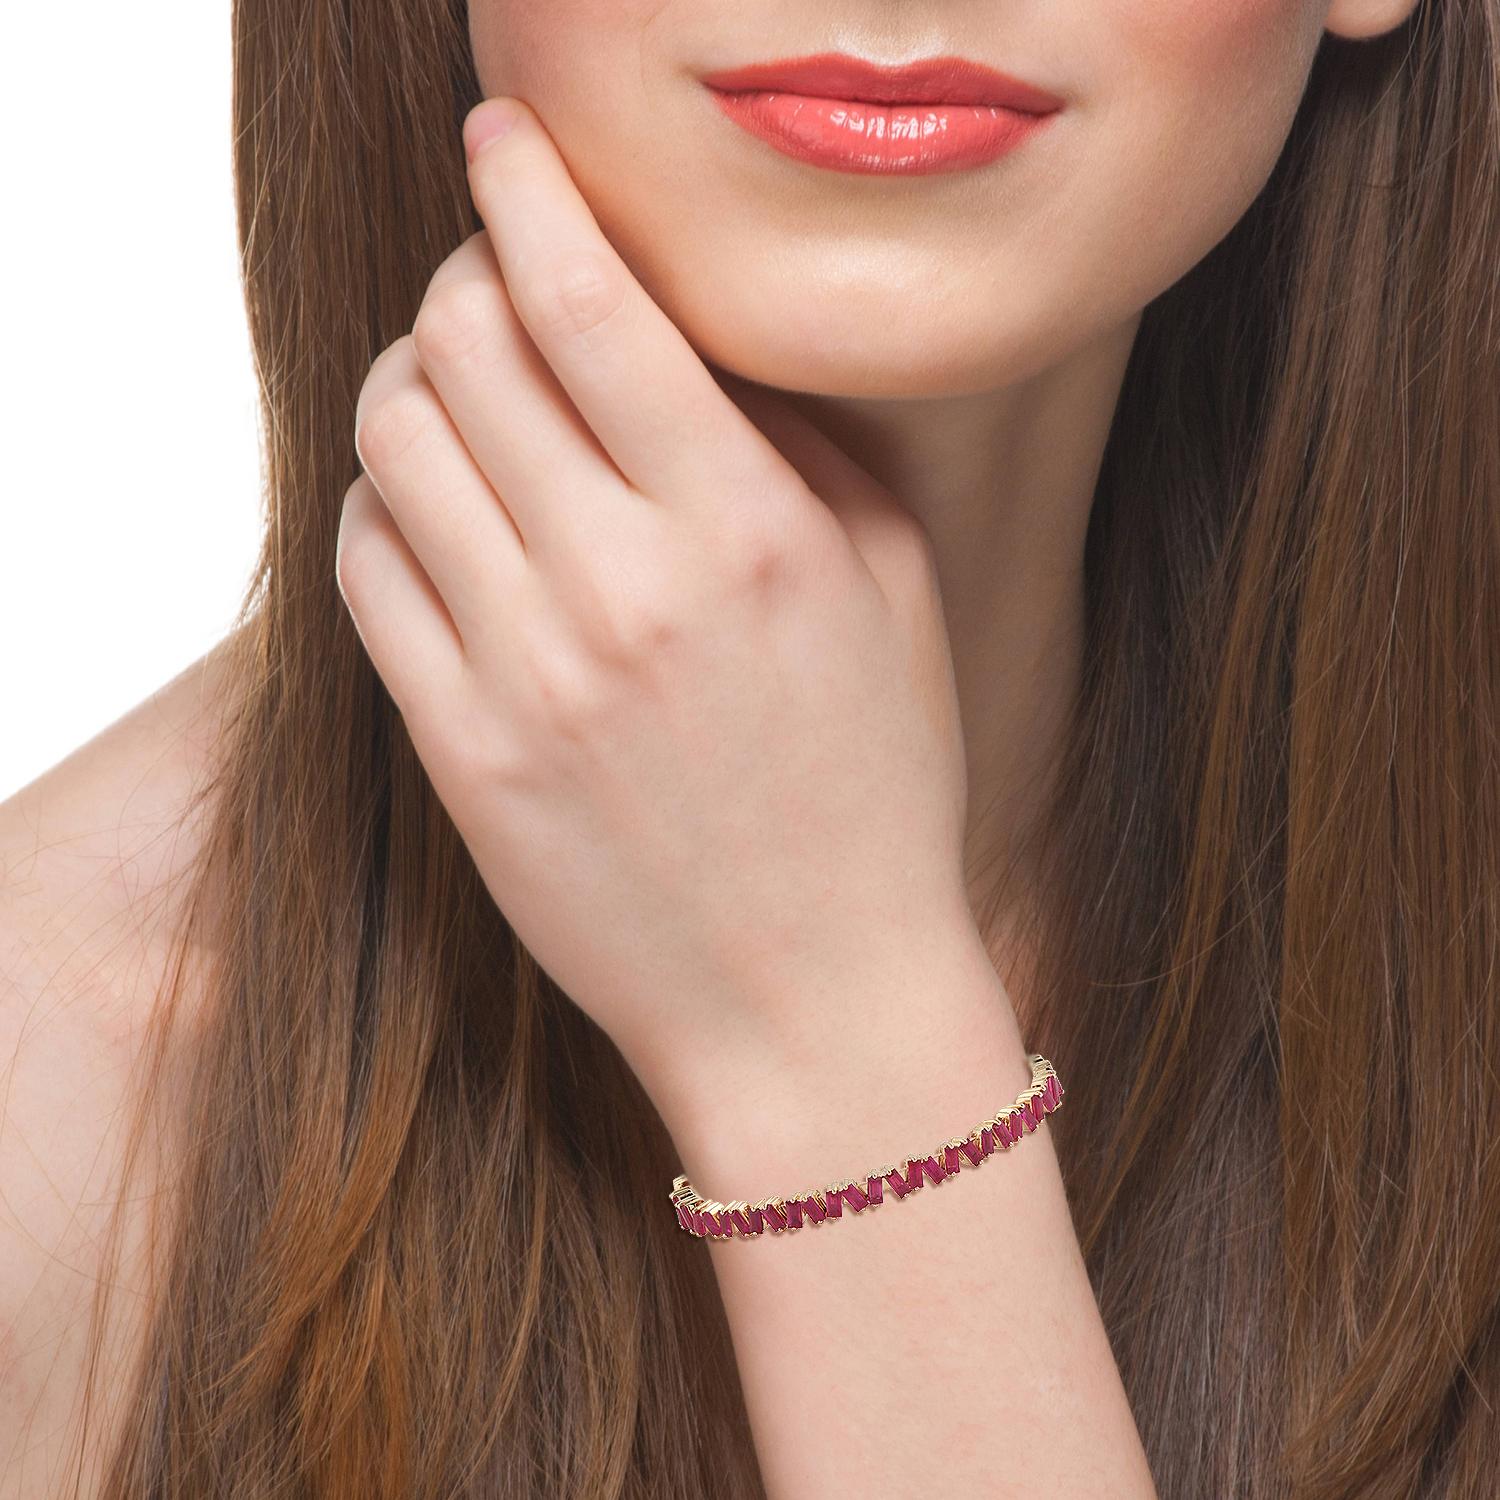 A stunning bracelet handmade in 18K gold. It is set in 4.27 carats of baguette ruby. Wear it alone or stack it with your favorite pieces. Bangle circumference is 6-in. Bangle is 3/16-in. wide. Opening measures 1/2-in. across

FOLLOW  MEGHNA JEWELS